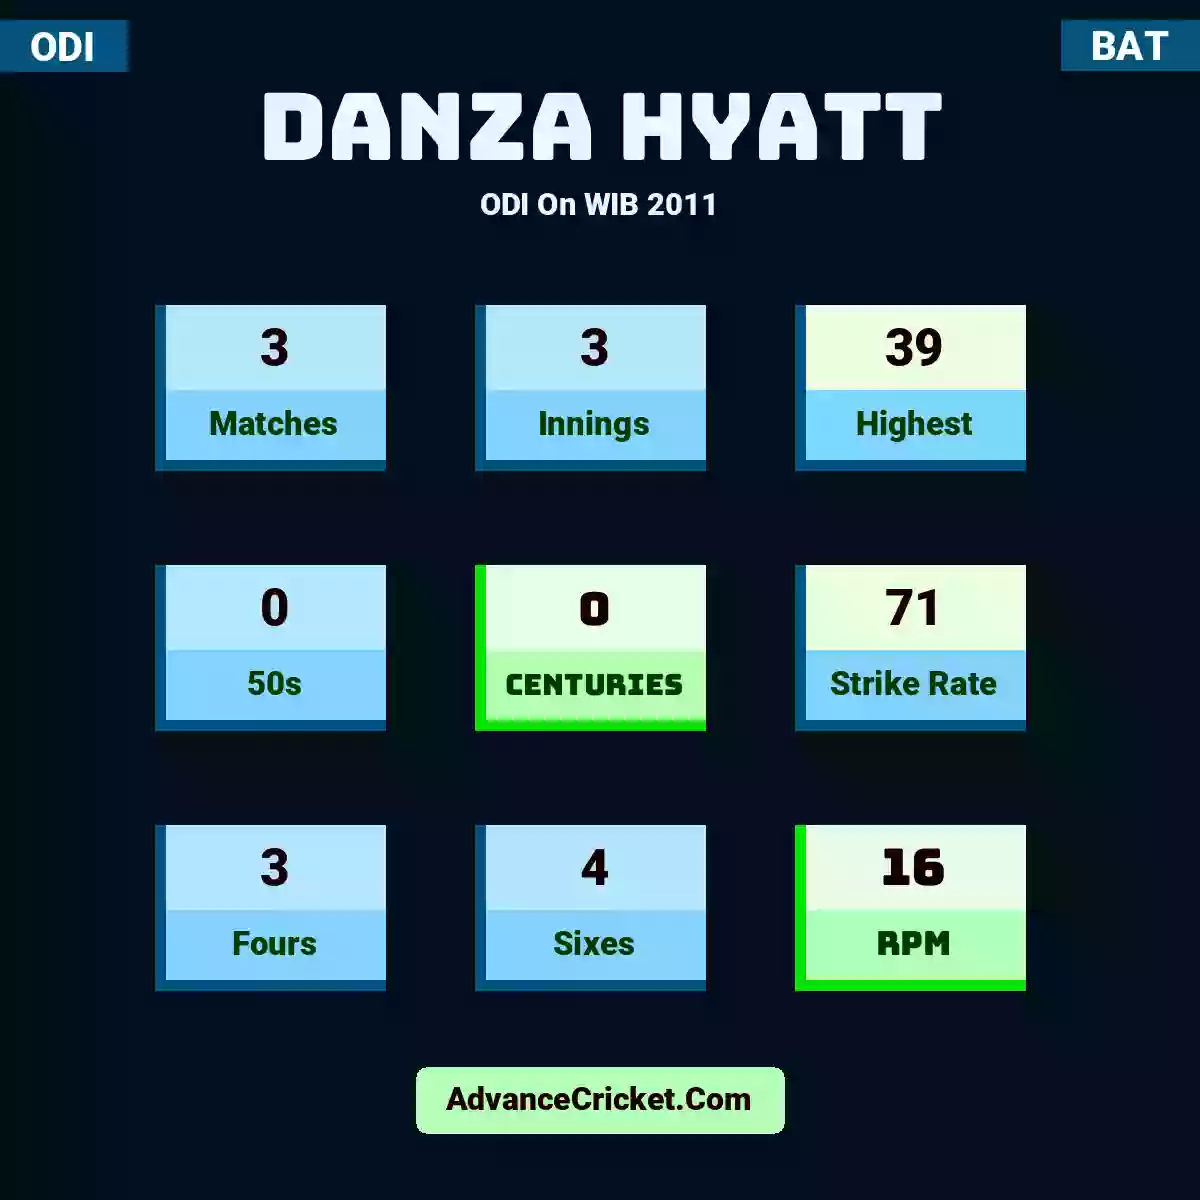 Danza Hyatt ODI  On WIB 2011, Danza Hyatt played 3 matches, scored 39 runs as highest, 0 half-centuries, and 0 centuries, with a strike rate of 71. D.Hyatt hit 3 fours and 4 sixes, with an RPM of 16.